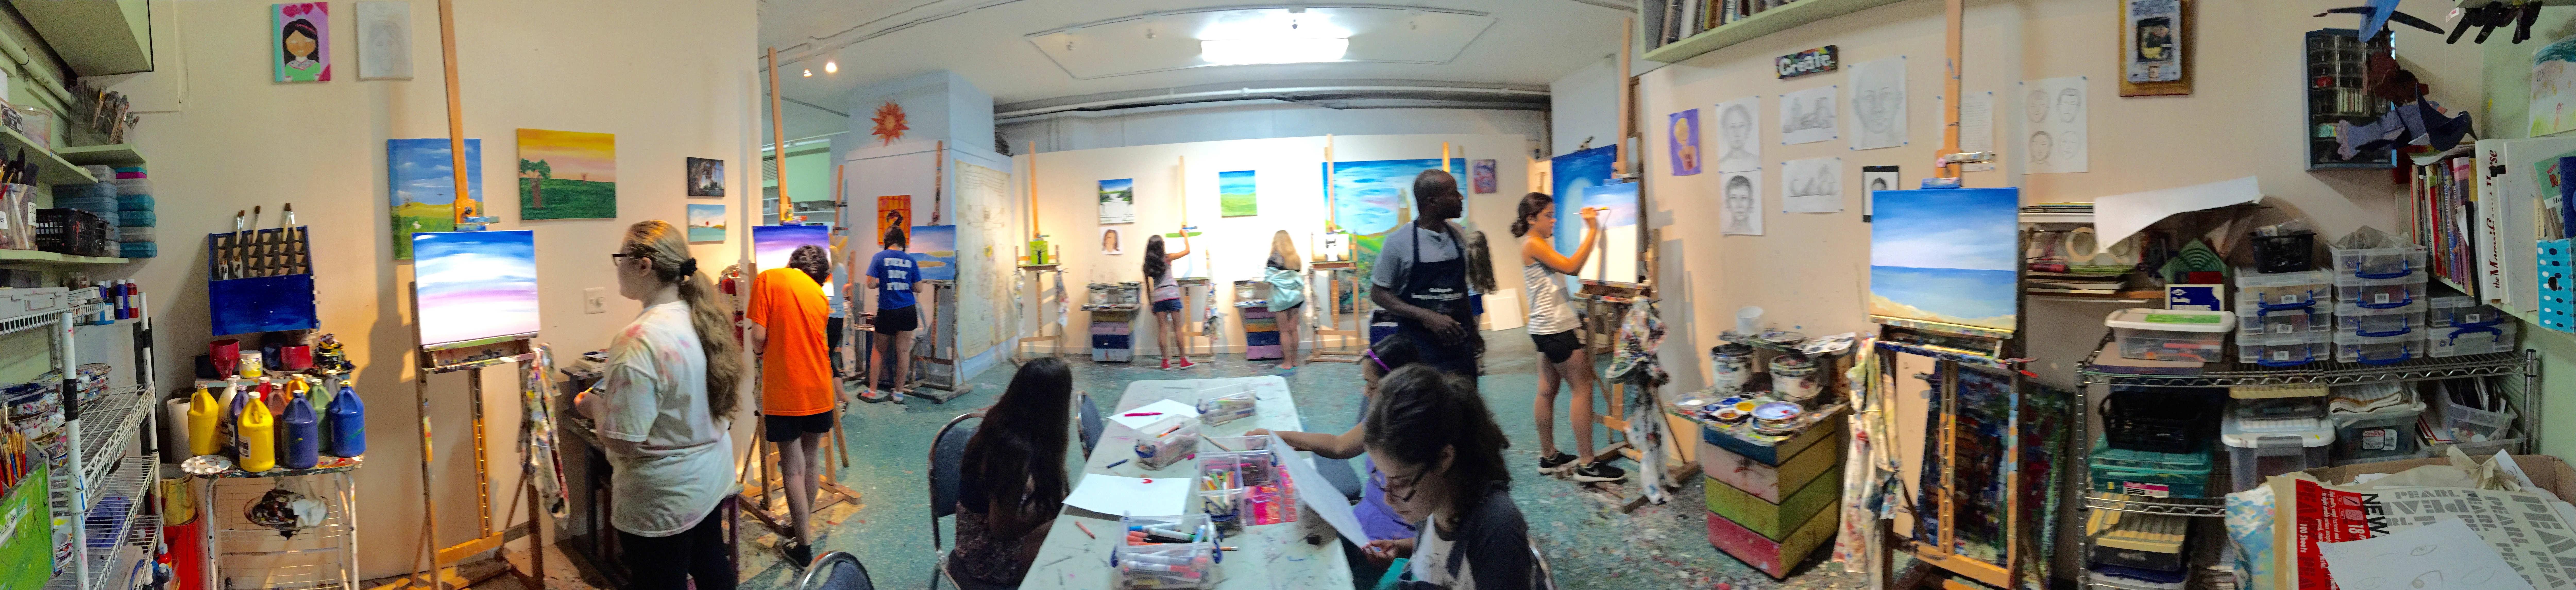 Creative Art Space for Kids, Art Classes for Kids on Long Island